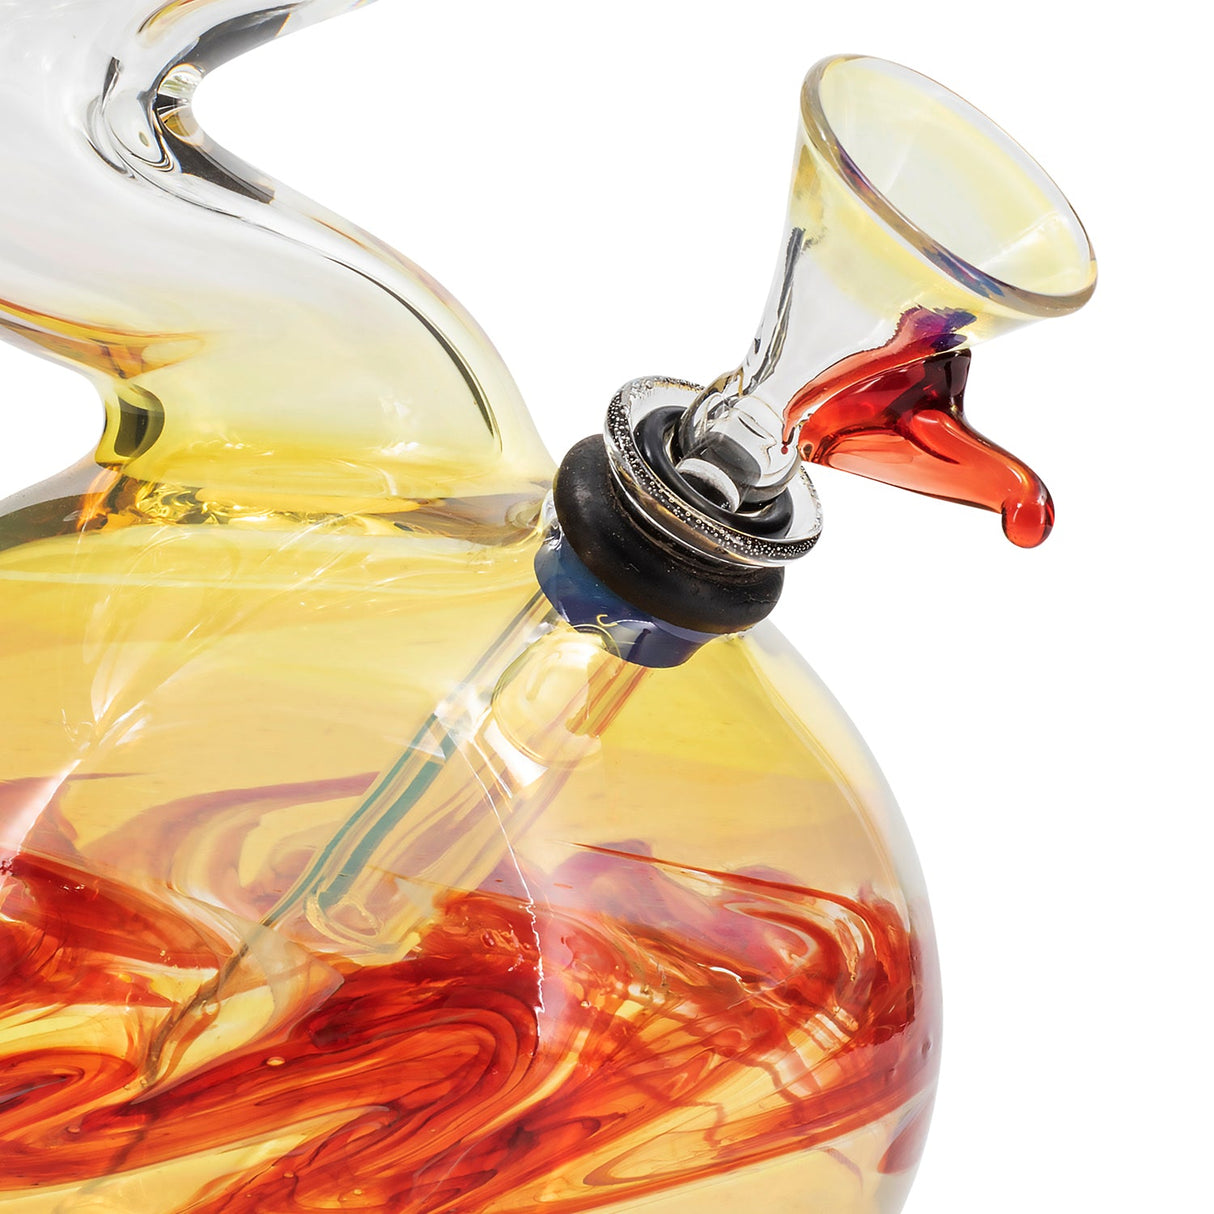 Close-up of LA Pipes "Switchback" Bong with amber swirl design, bubble base, and clear bowl